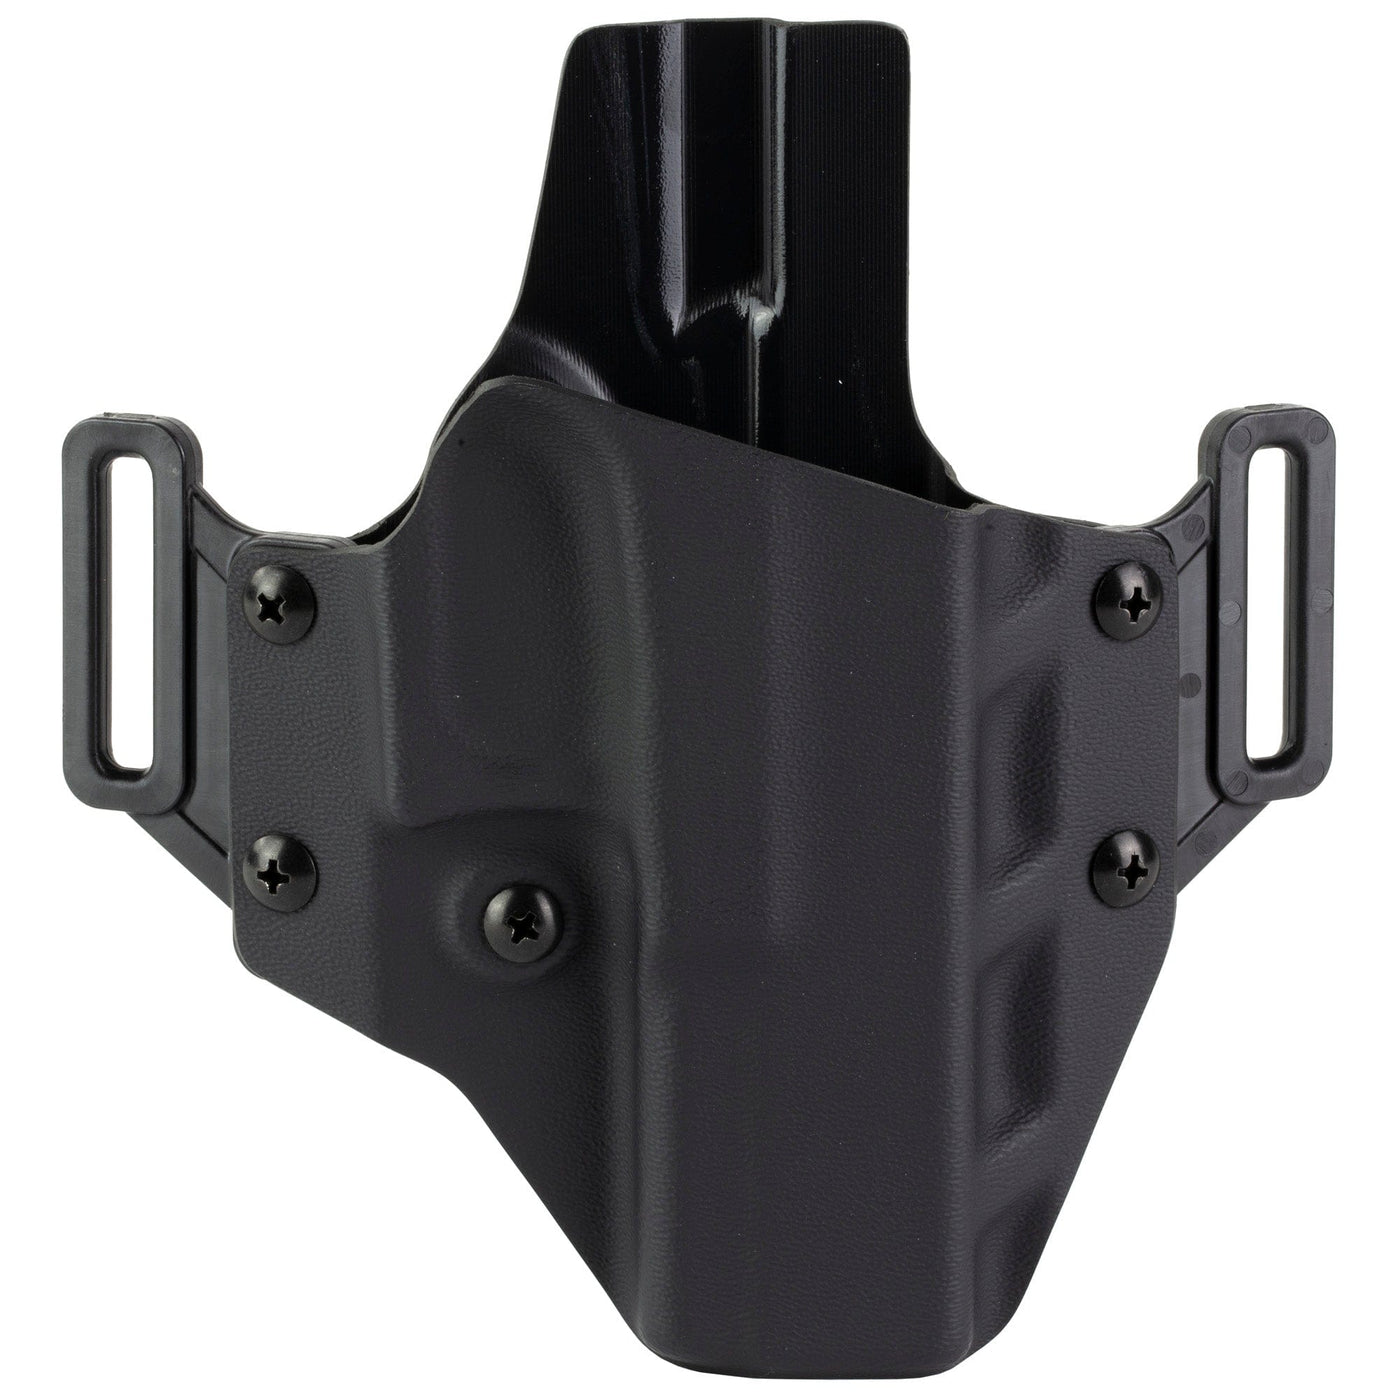 CRUCIAL CONCEALMENT Crucial Owb For Glock 17 Firearm Accessories